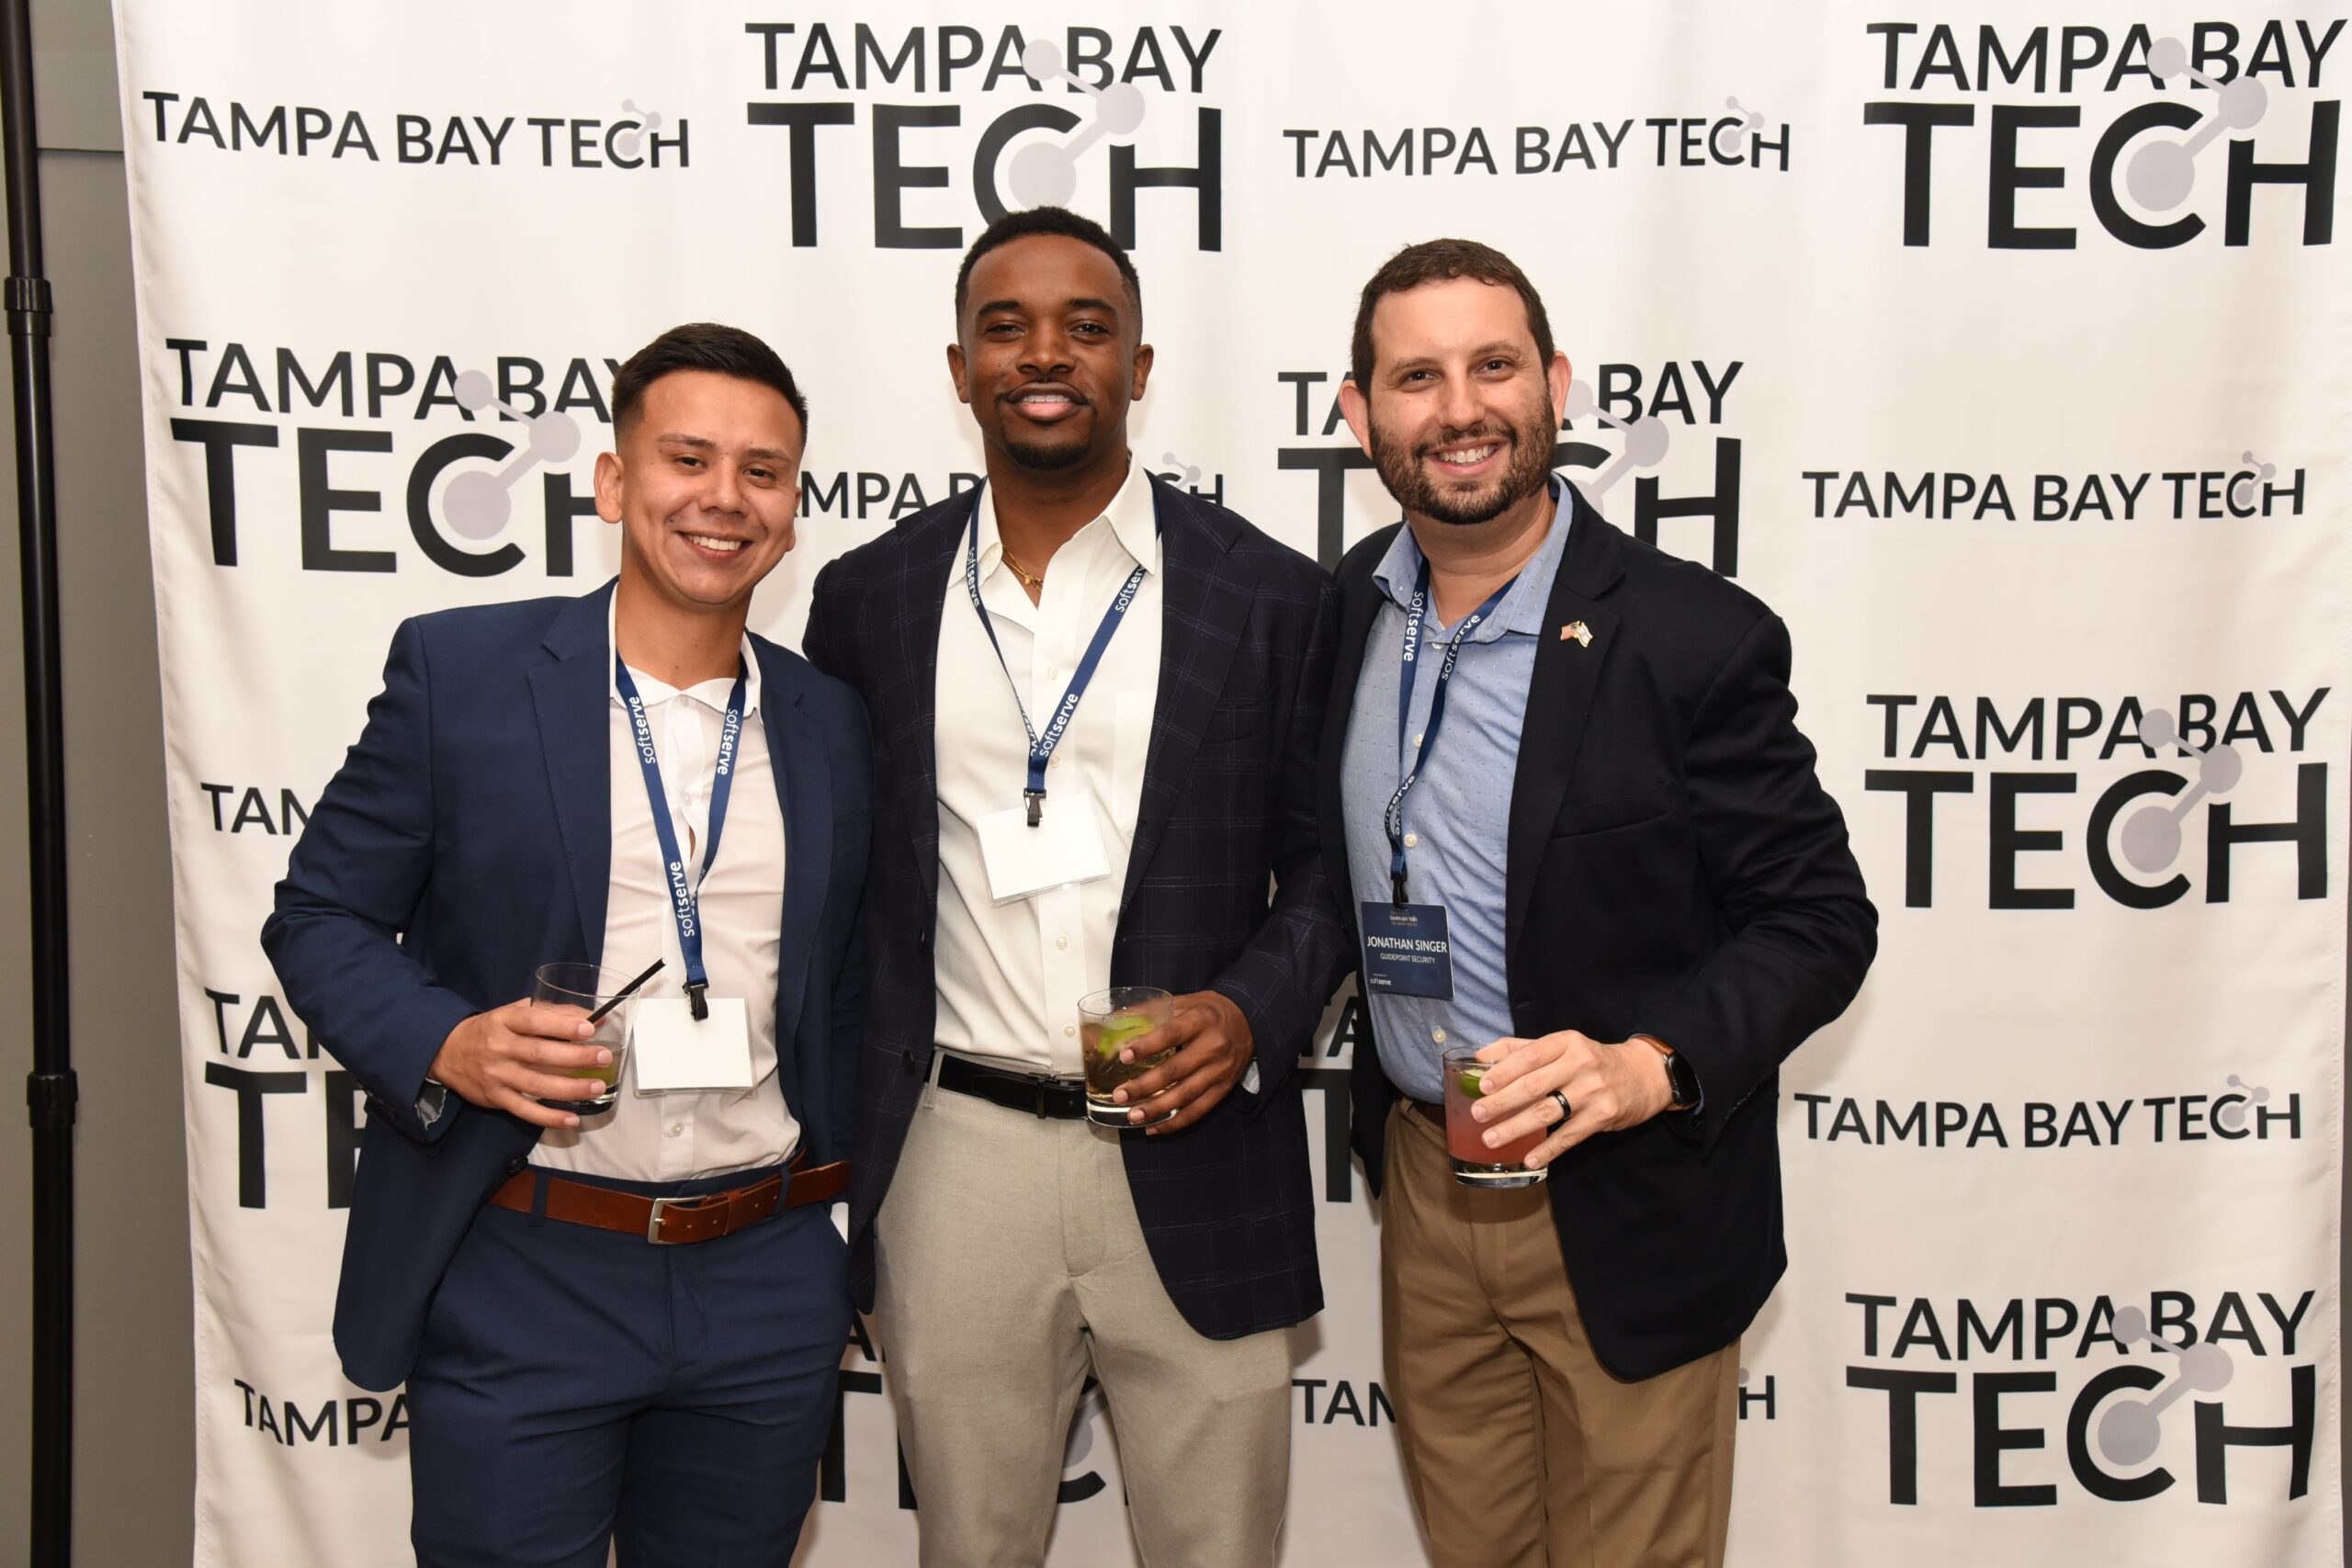 Community Meetups and Events with Tampa Bay Tech